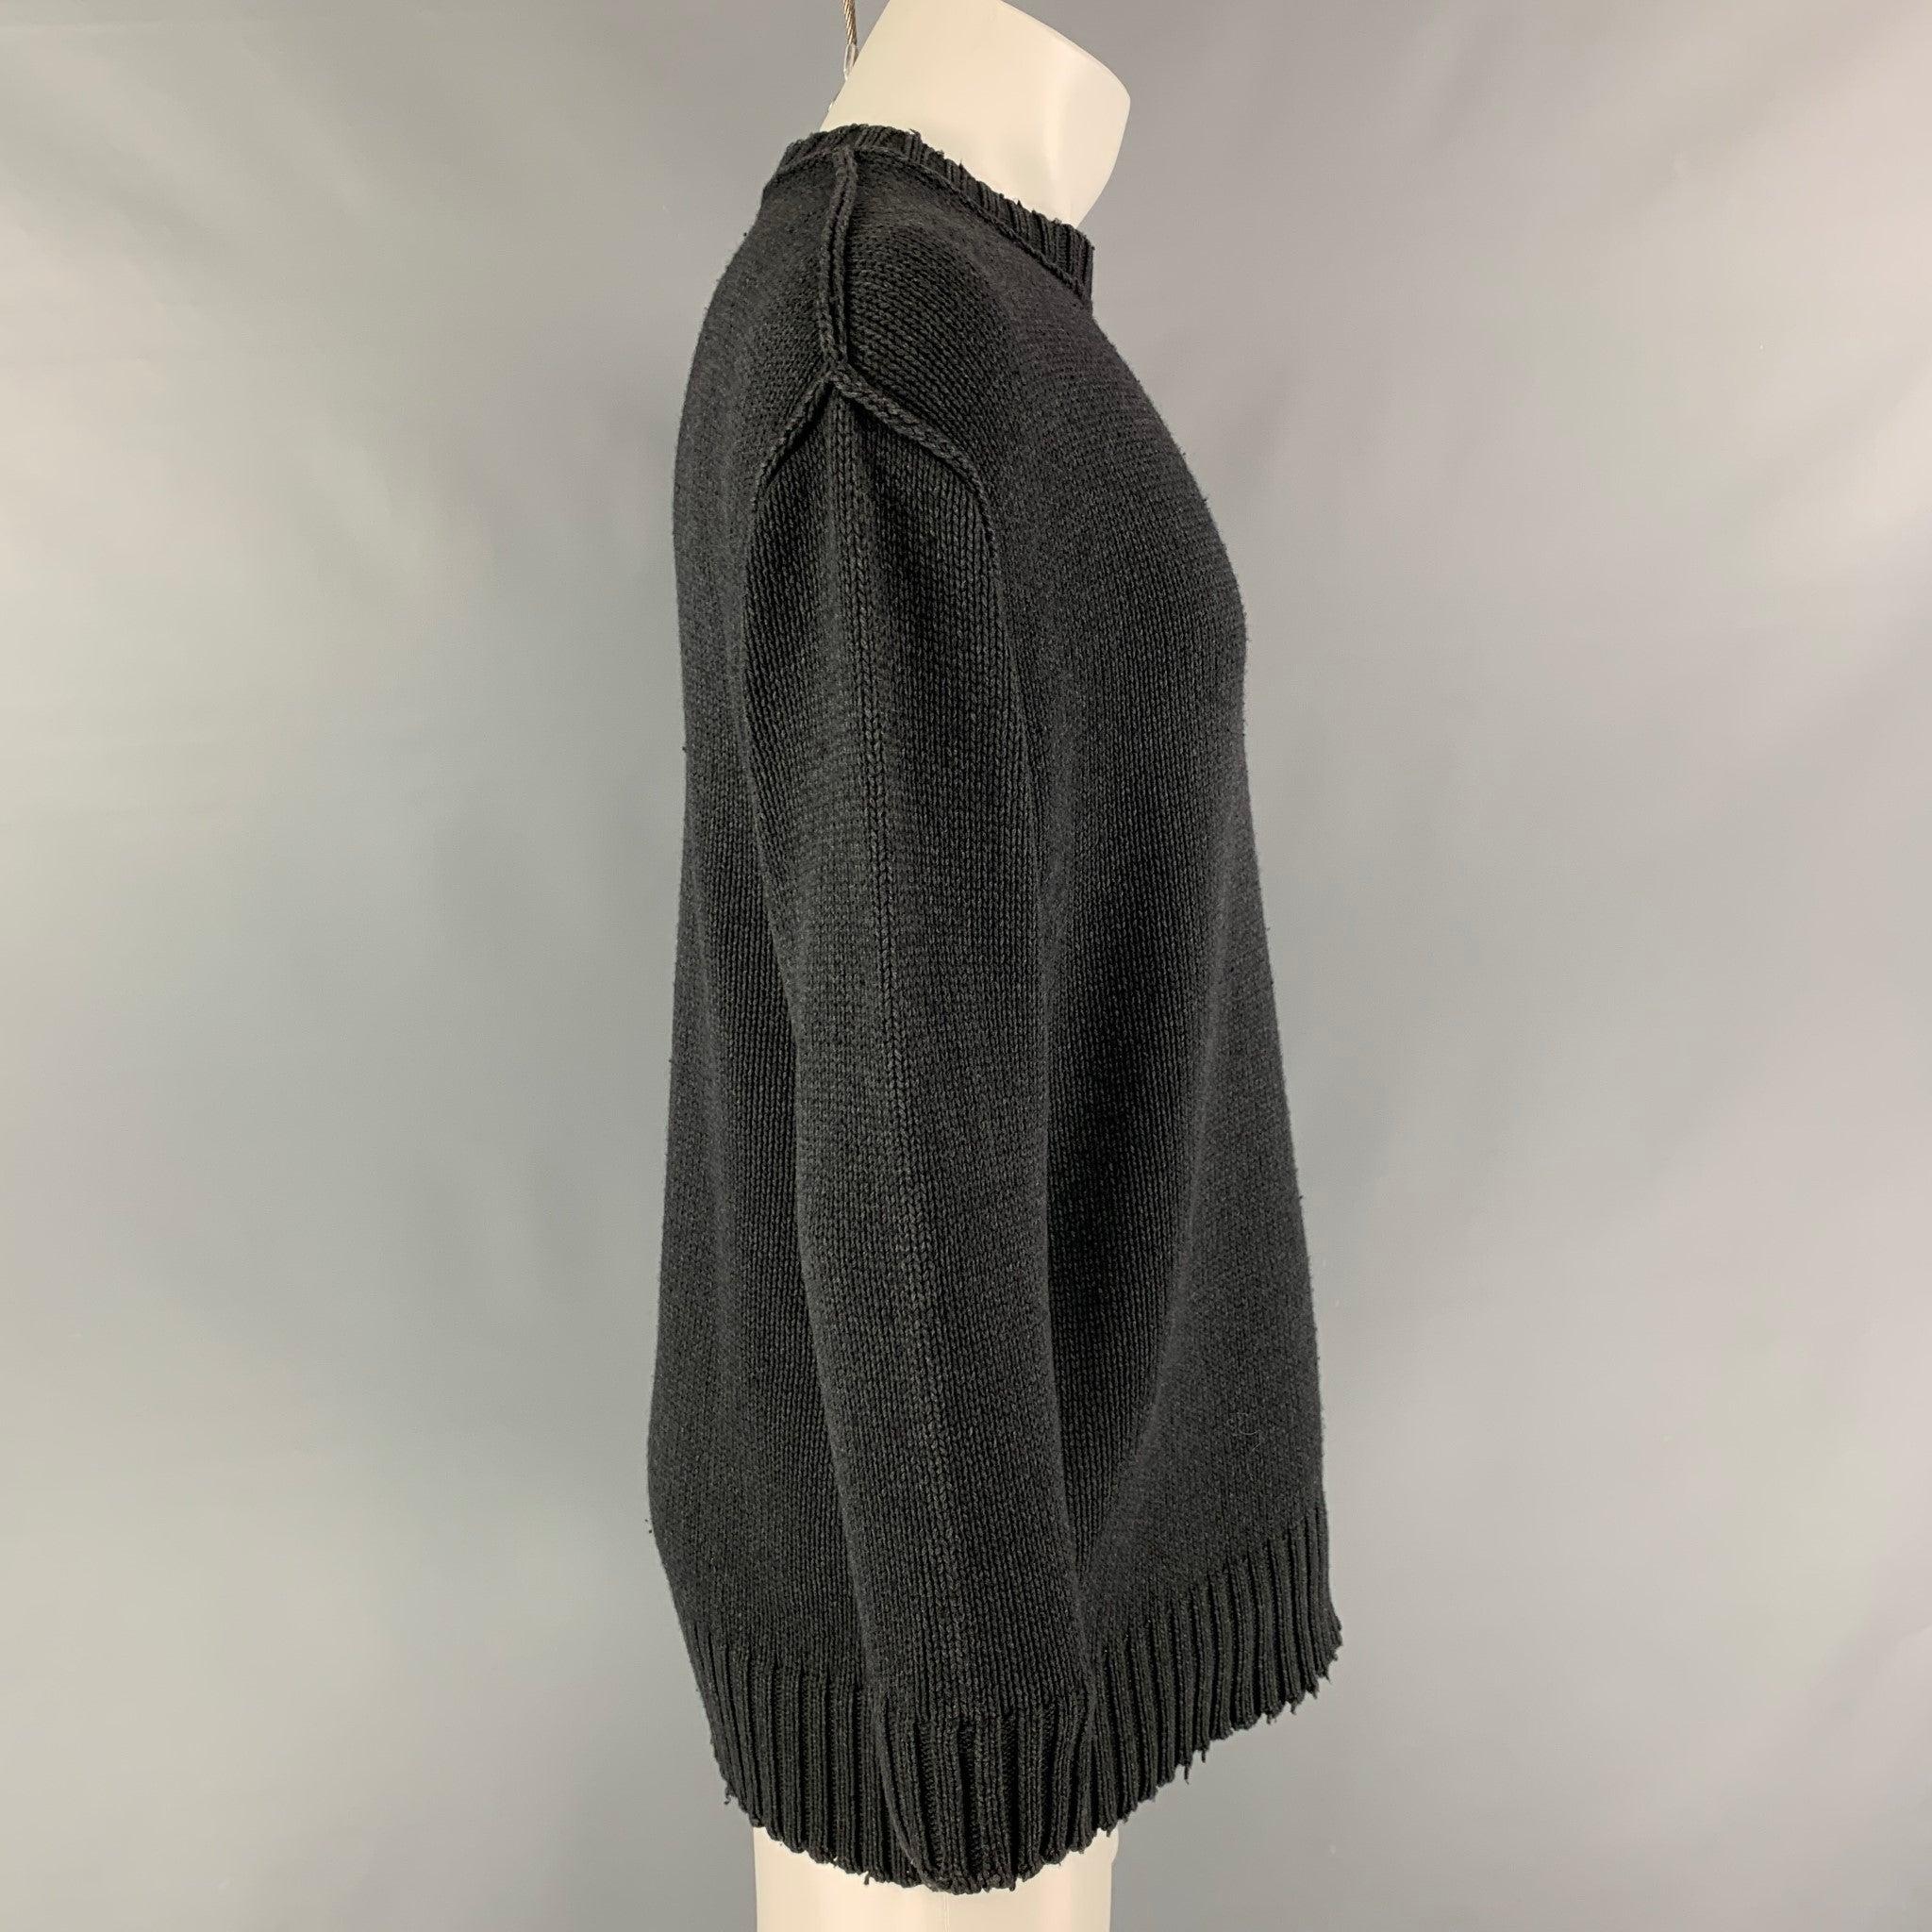 R13 sweater comes in a charcoal acrylic / wool featuring a oversized fit, distressed, and a crew-neck.
Very Good
Pre-Owned Condition. 

Marked:   XS 

Measurements: 
 
Shoulder: 22 inches  Chest: 45 inches  Sleeve: 22.5 inches  Length: 29 inches 
 